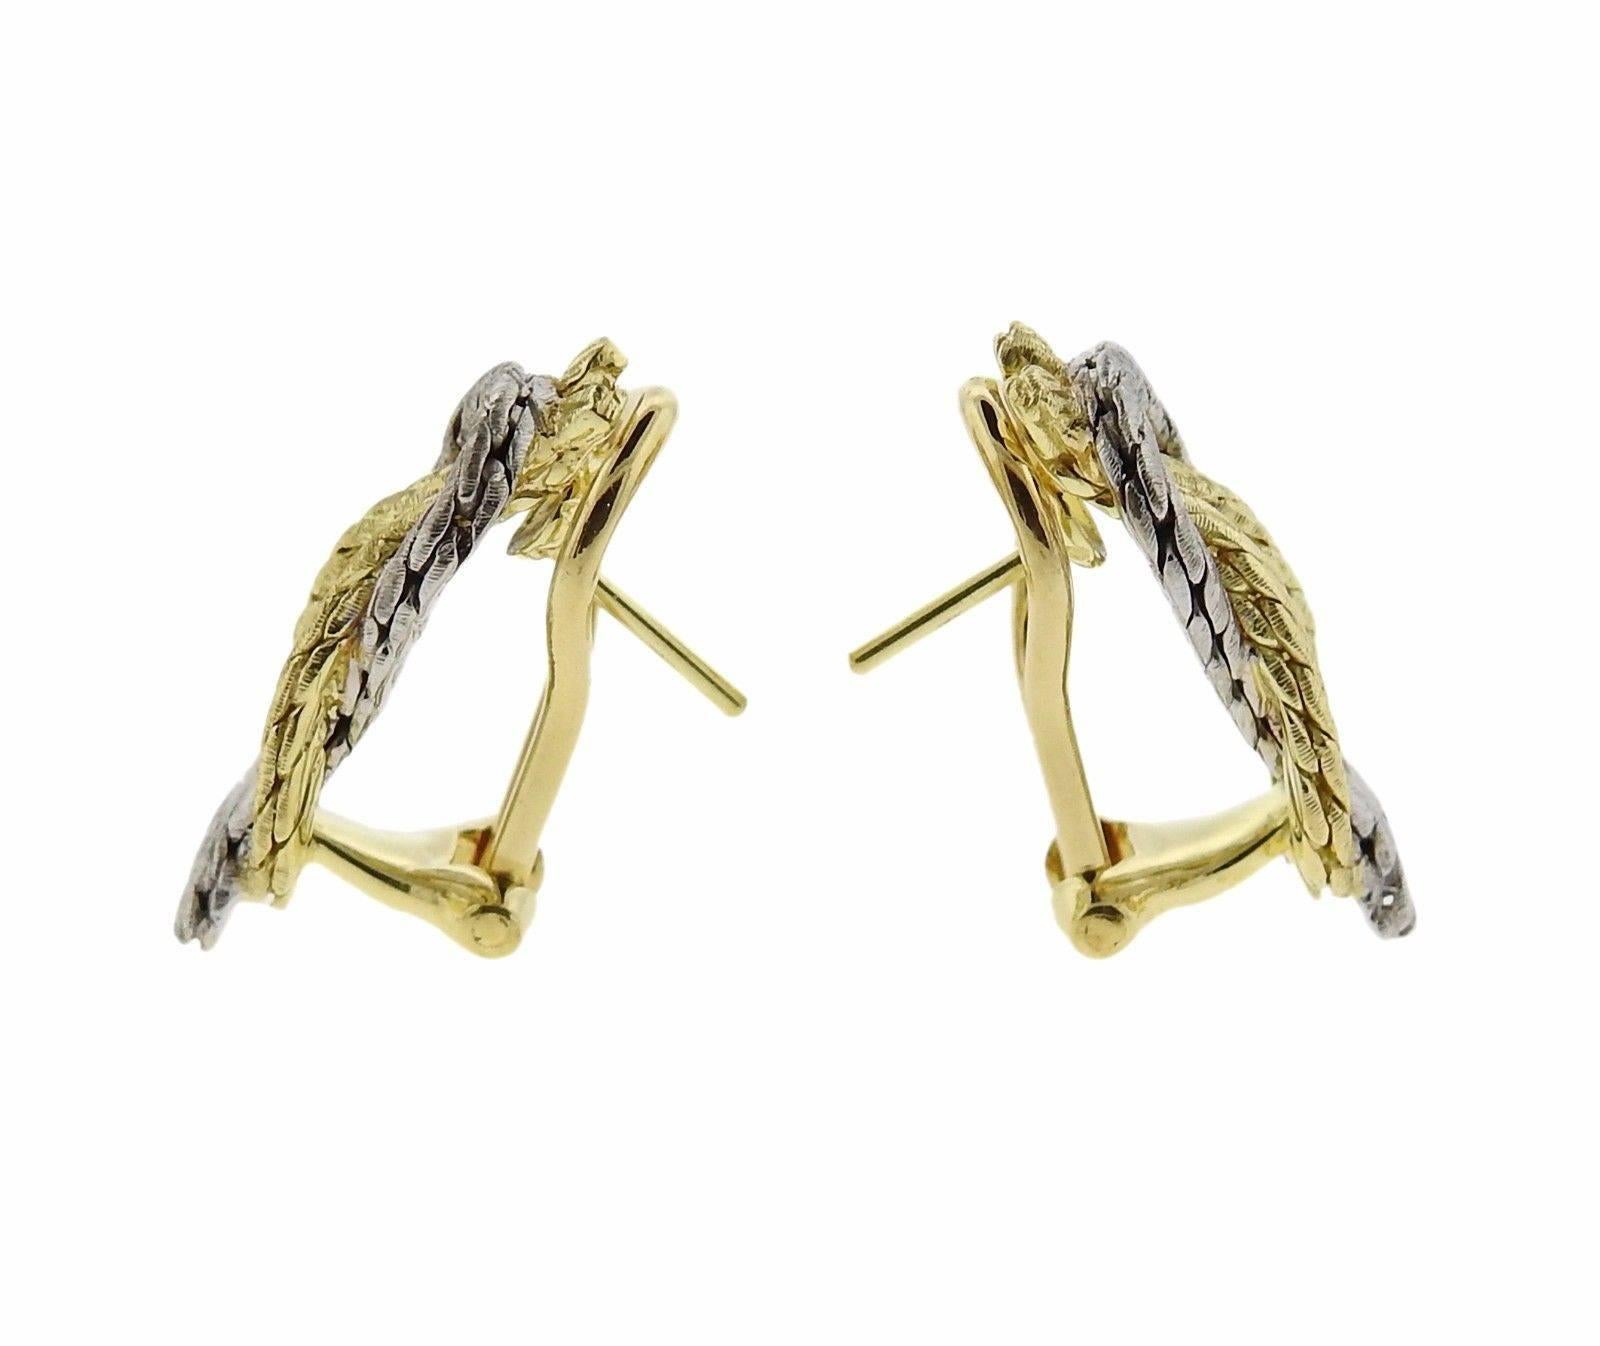 A pair of 18k yellow and white gold earrings measuring 20mm x 9mm and weighing 9.65 grams.  Marked: 18k,  Italy, Buccellati.  The current retail of this pair is $3640.